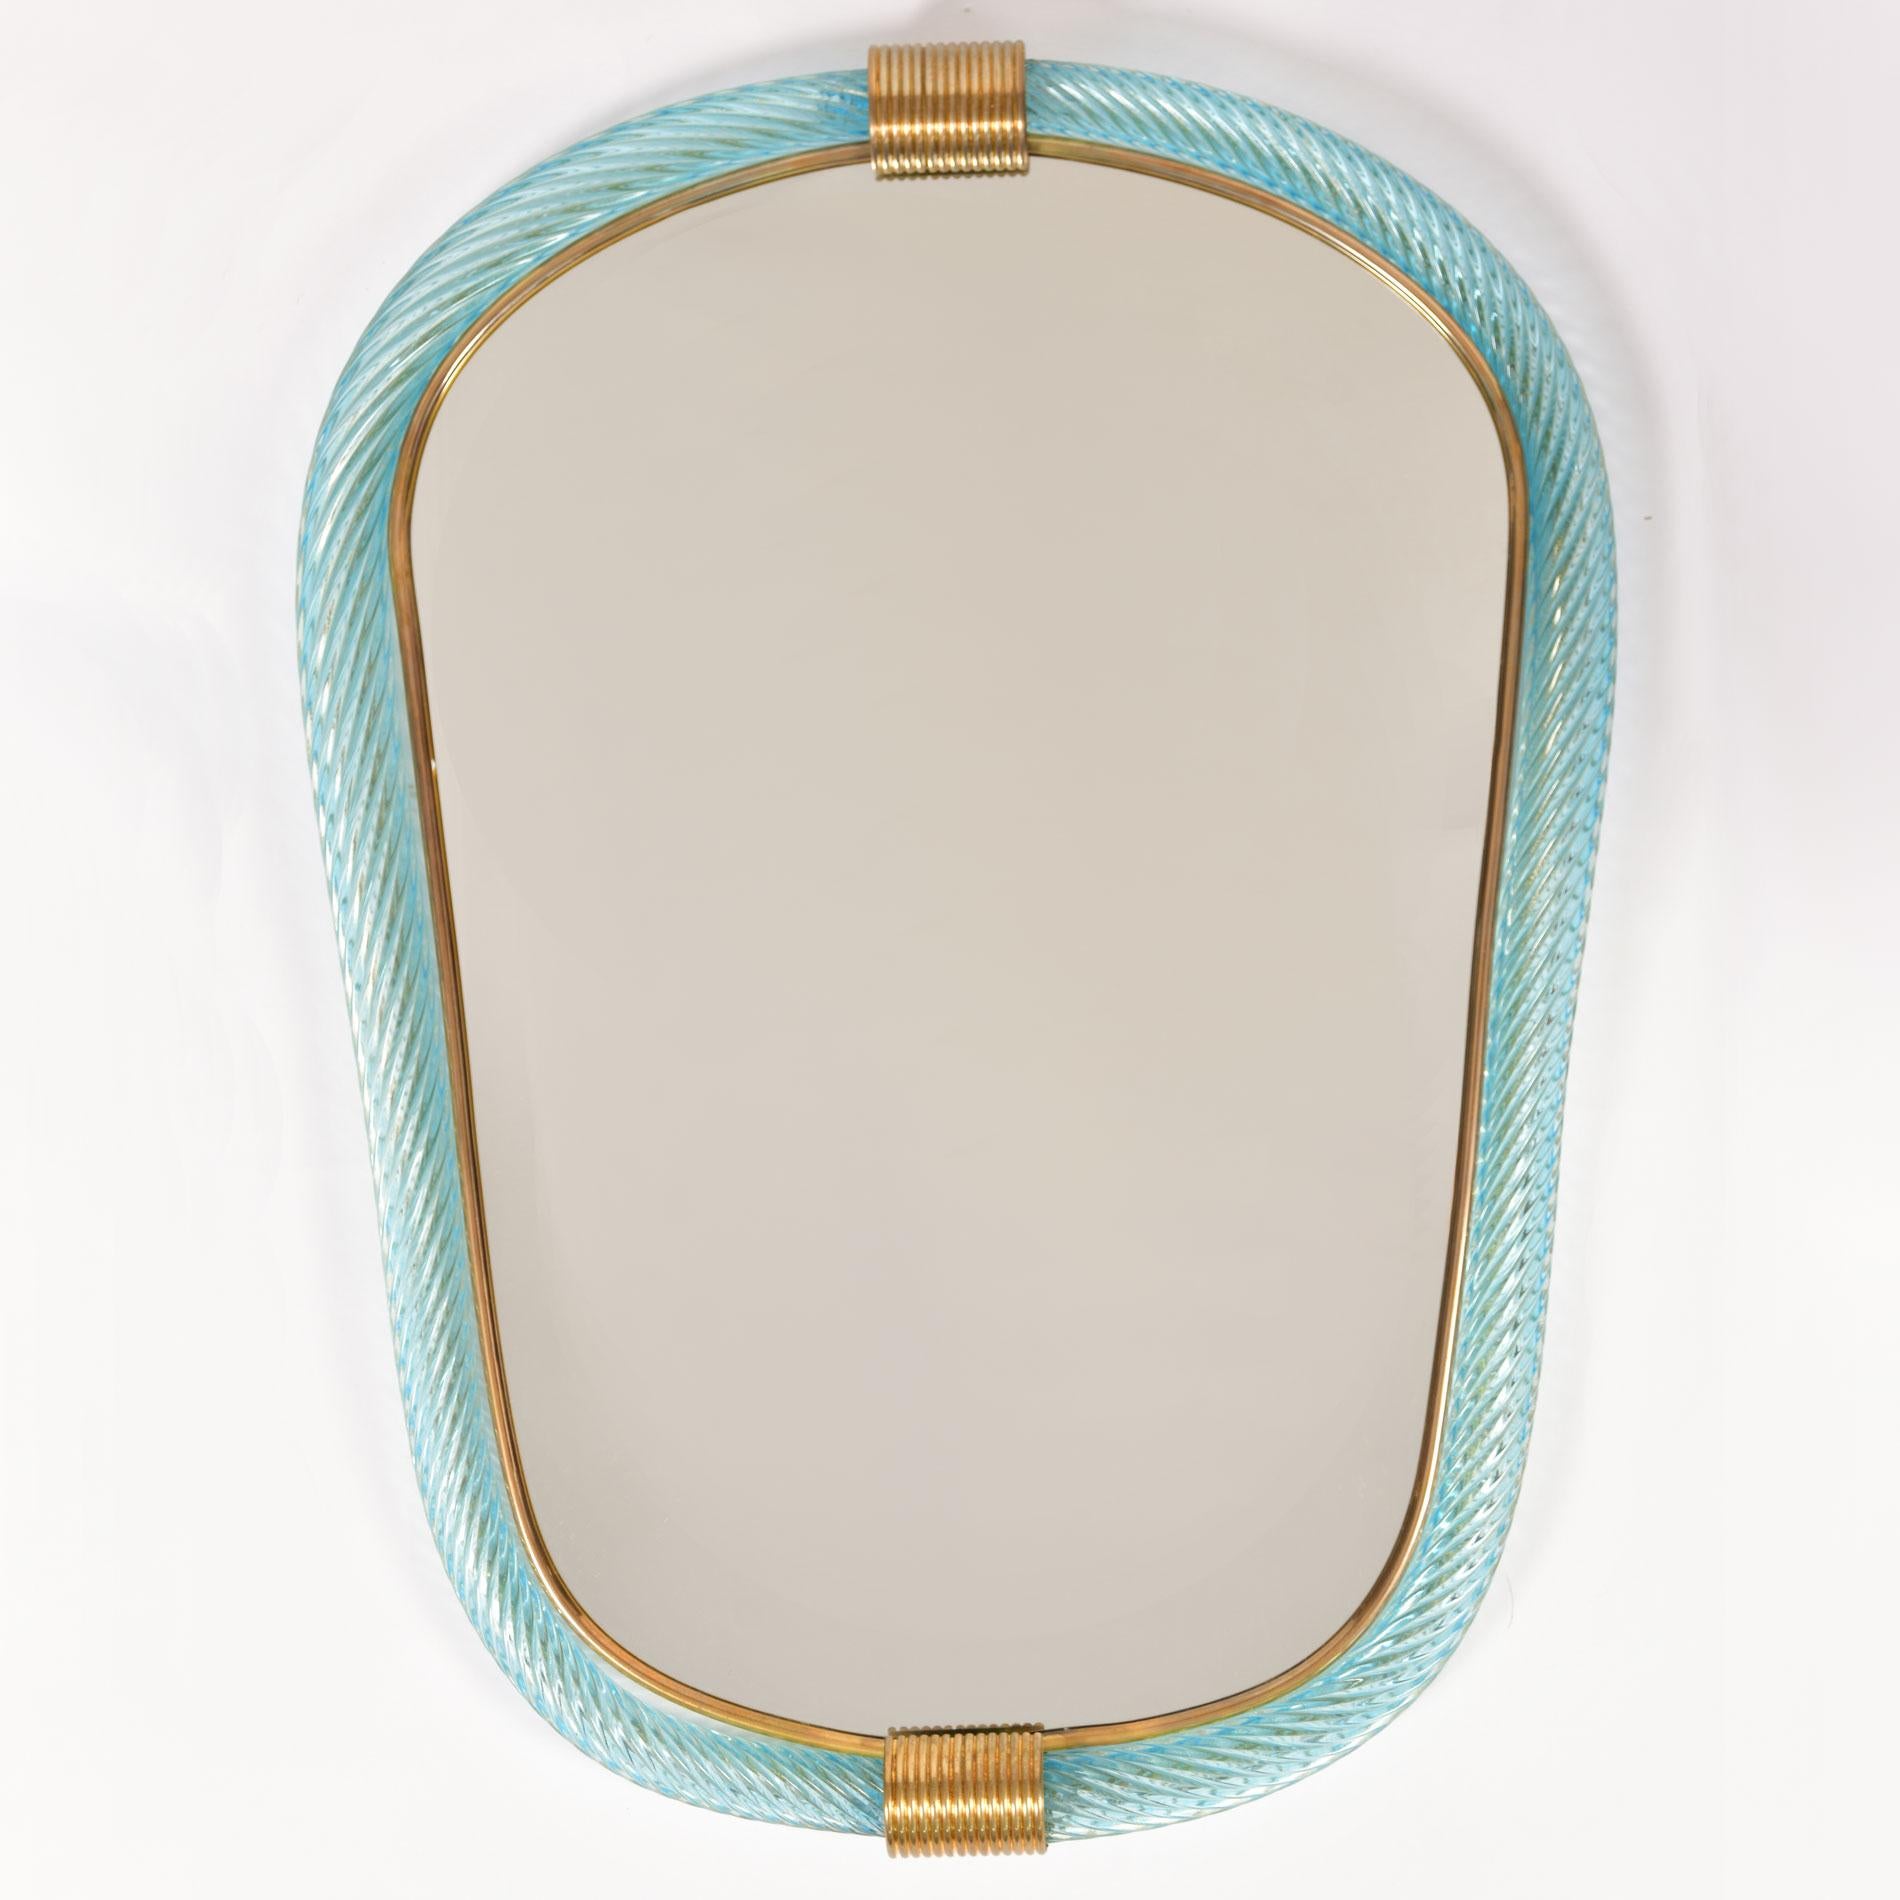 Pale green/blue ribbed hand blown Murano glass eliptical mirrors with two brass fluted clasps at the top and bottom, the inner edge lined with slender brass filet.

Also available in palest pink.

8 week lead-time if not in stock.